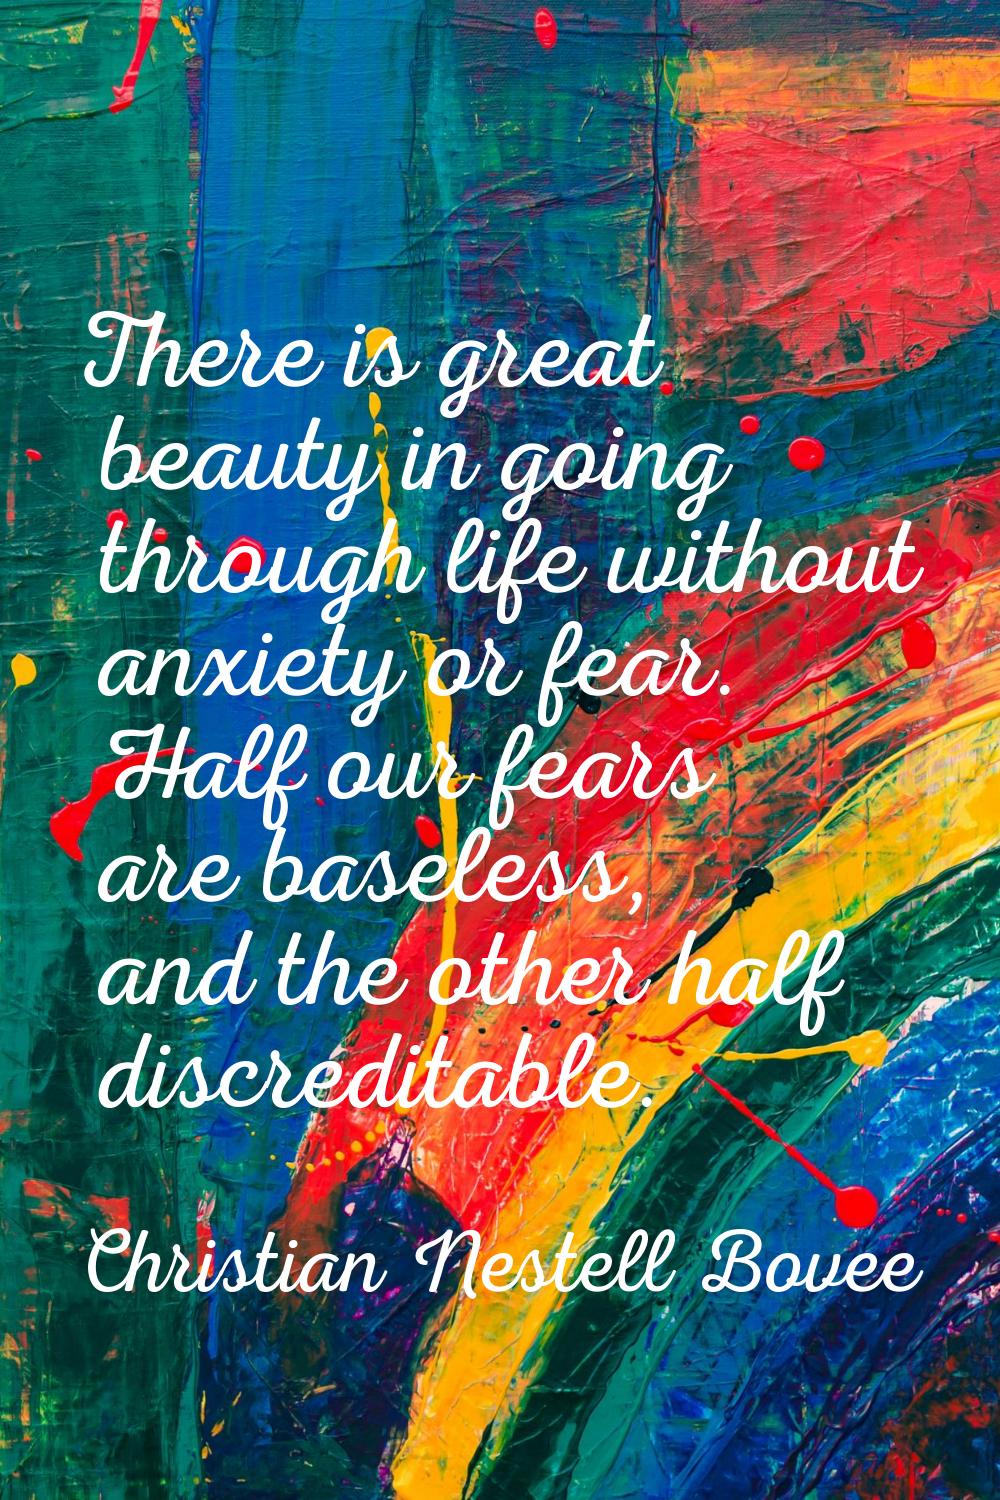 There is great beauty in going through life without anxiety or fear. Half our fears are baseless, a